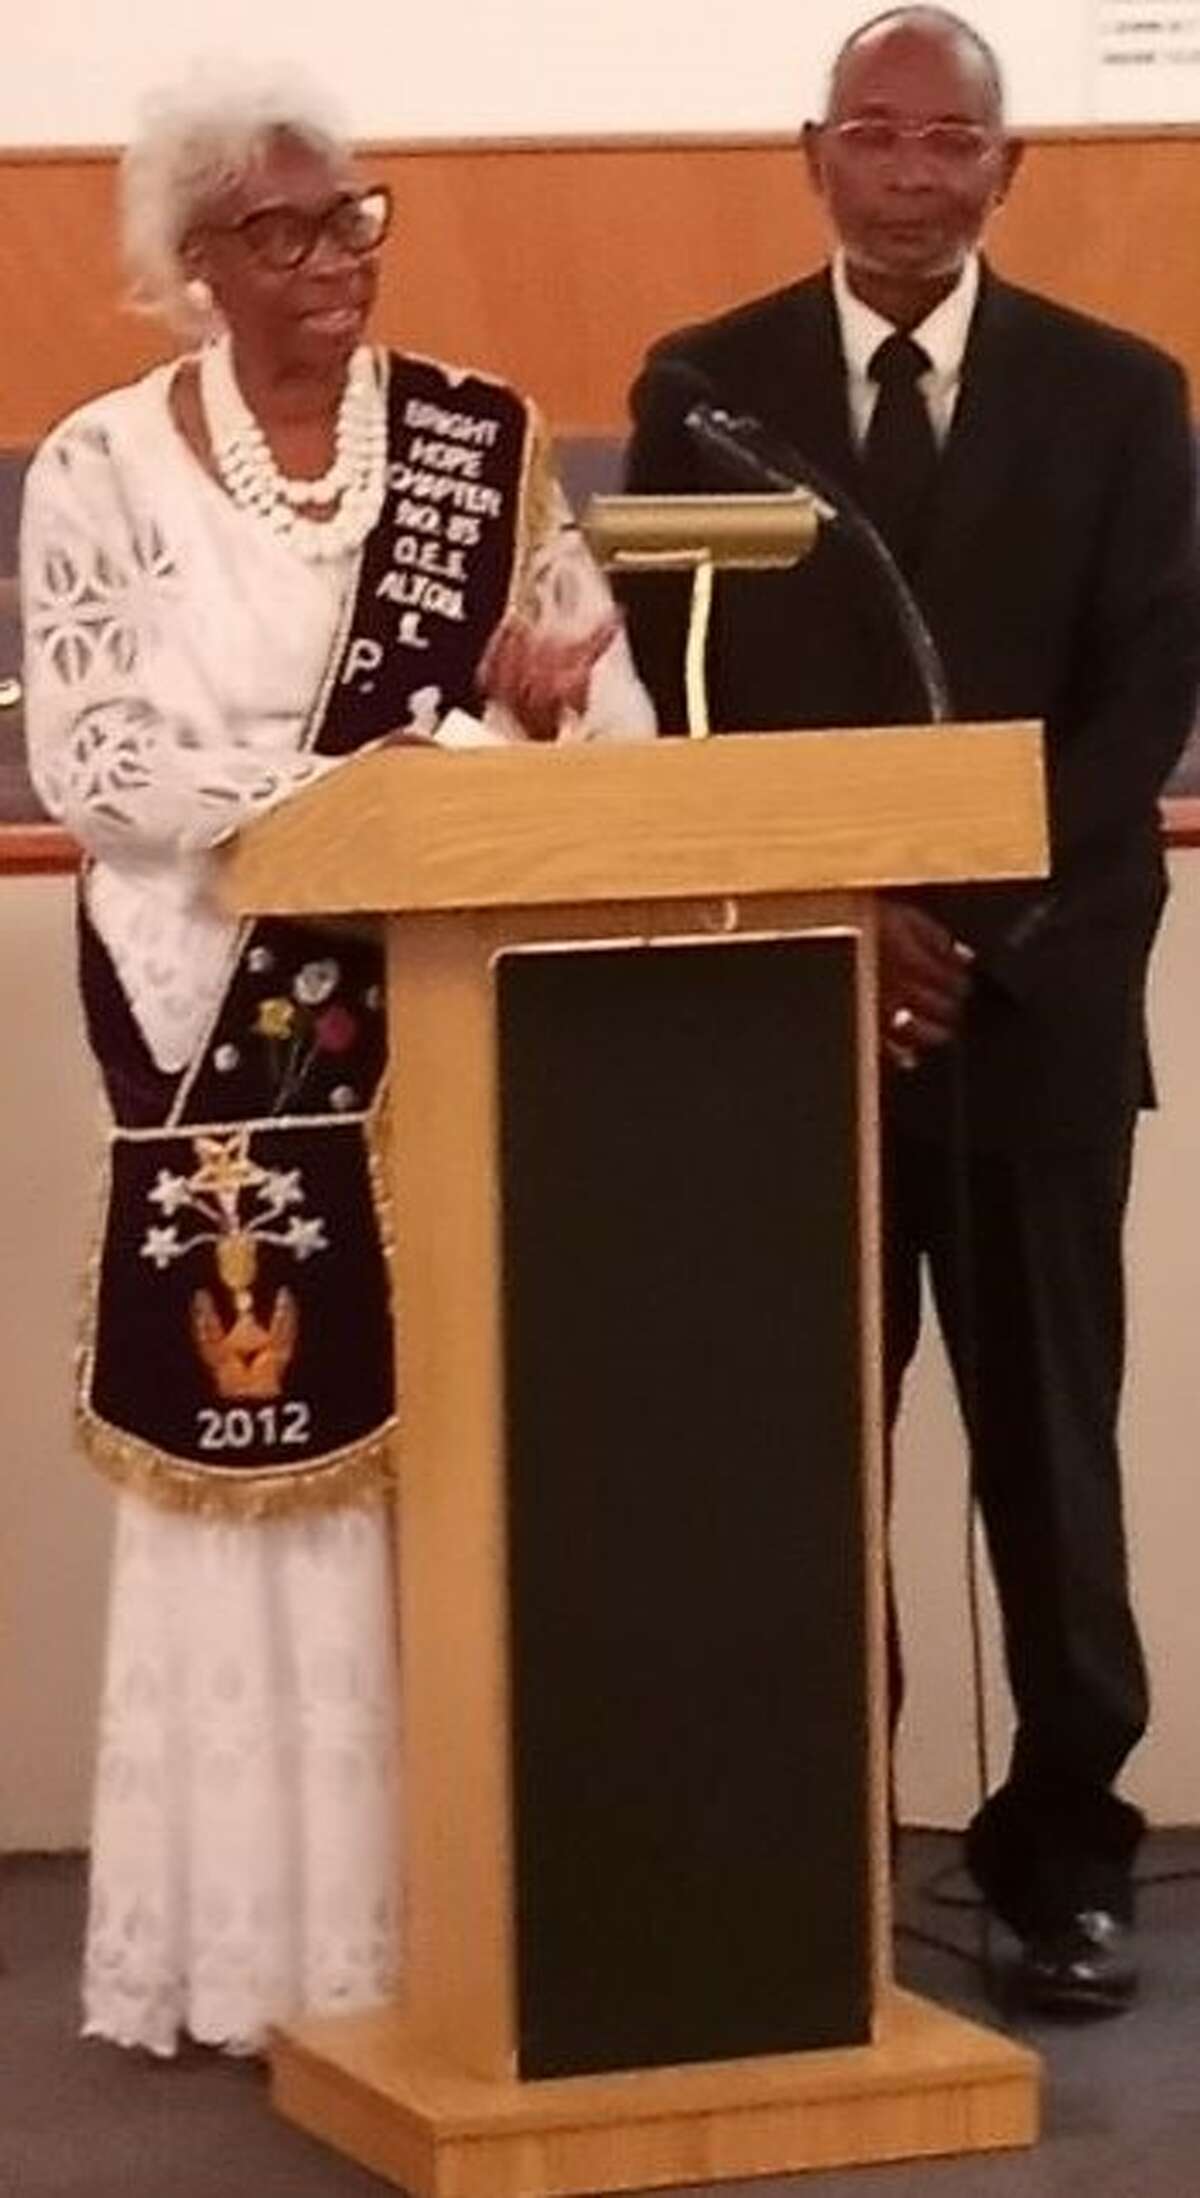 Worthy Matron Sister Maxine Caldwell and former Patron Brother Carneth Young speak Sunday at centennial celebration of the Bright Hope Chapter No. 85, Order of the Eastern Stars of Alton, Prince Hall Affiliated.